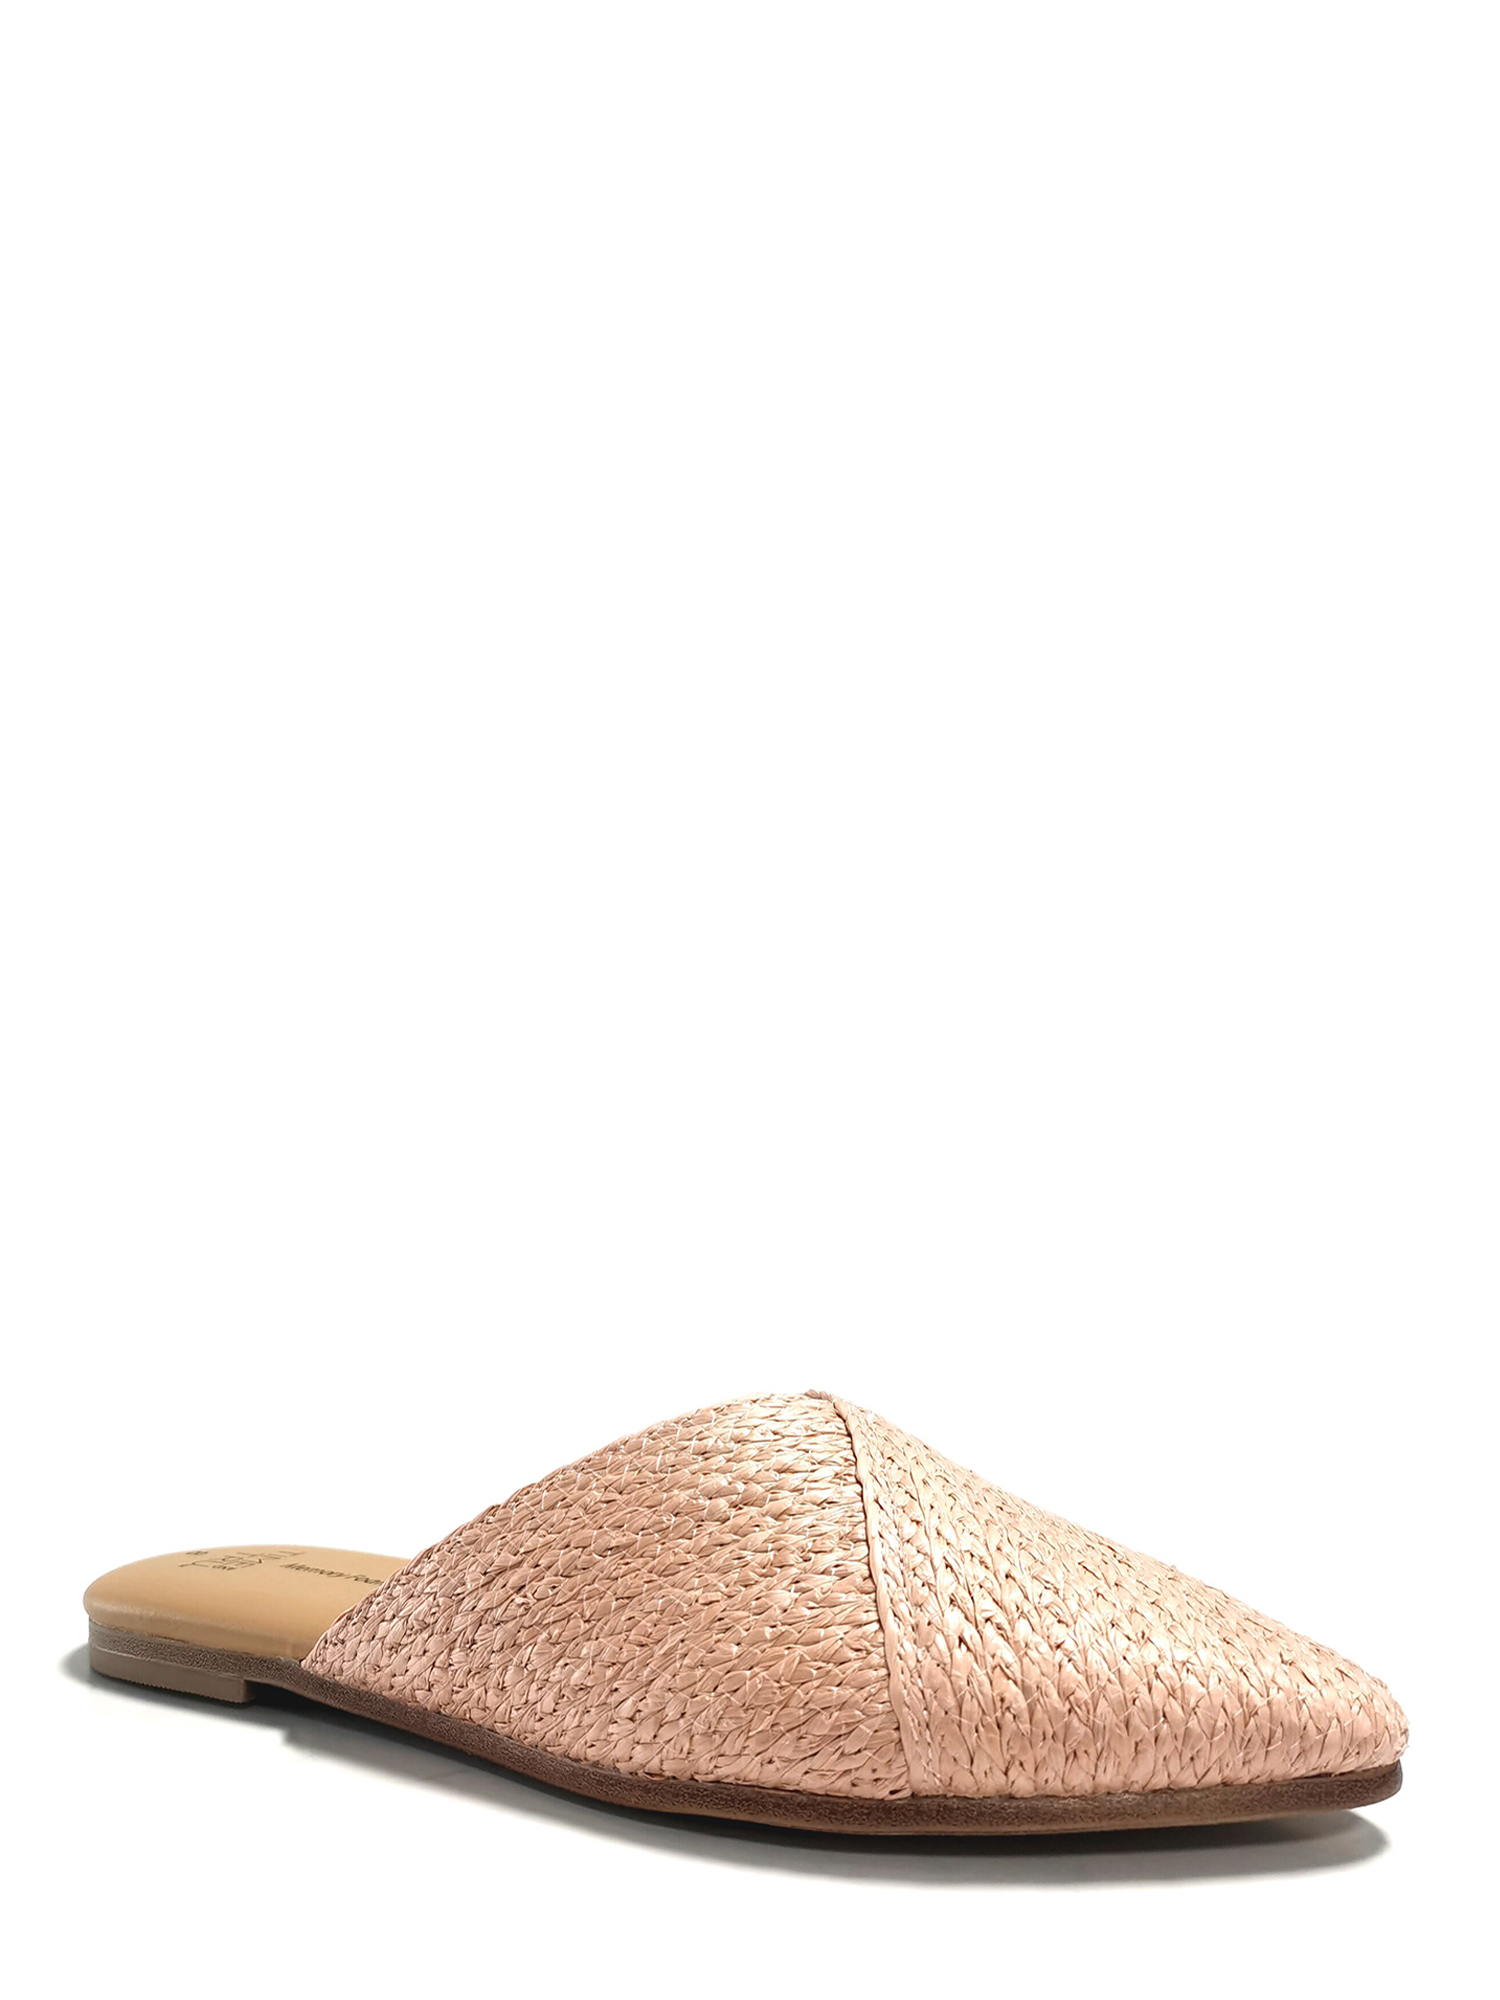 Time And Tru Women's Raffia Mule Shoes - image 1 of 6